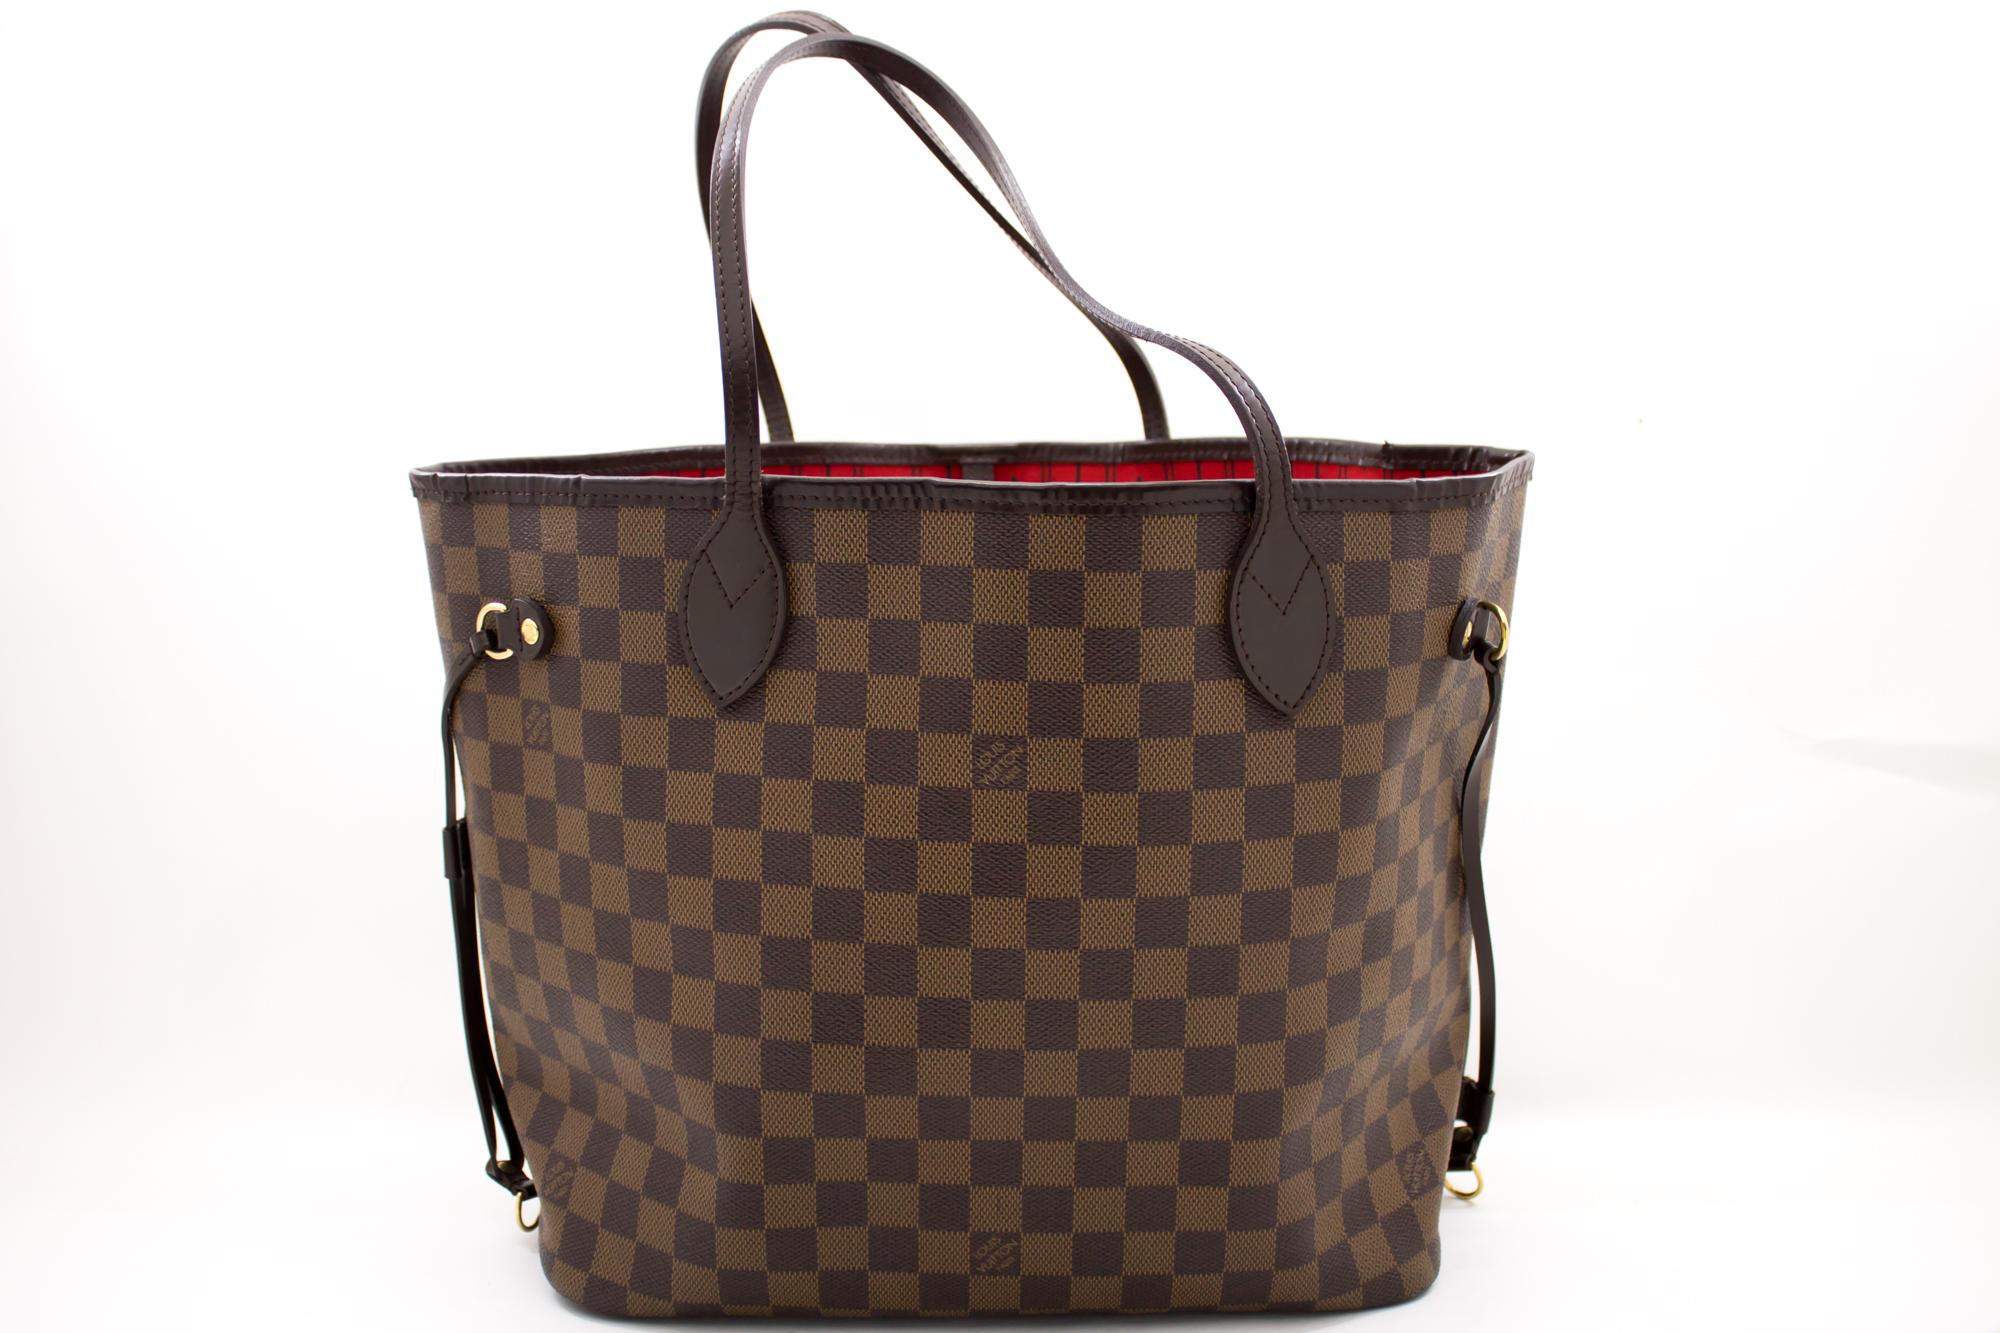 An authentic Louis Vuitton Damier Ebene Neverfull MM Shoulder Bag Canvas Purse. The color is Brown. The outside material is Canvas. The pattern is Damier. This item is Vintage / Classic. The year of manufacture would be 1986-1988.
Conditions &